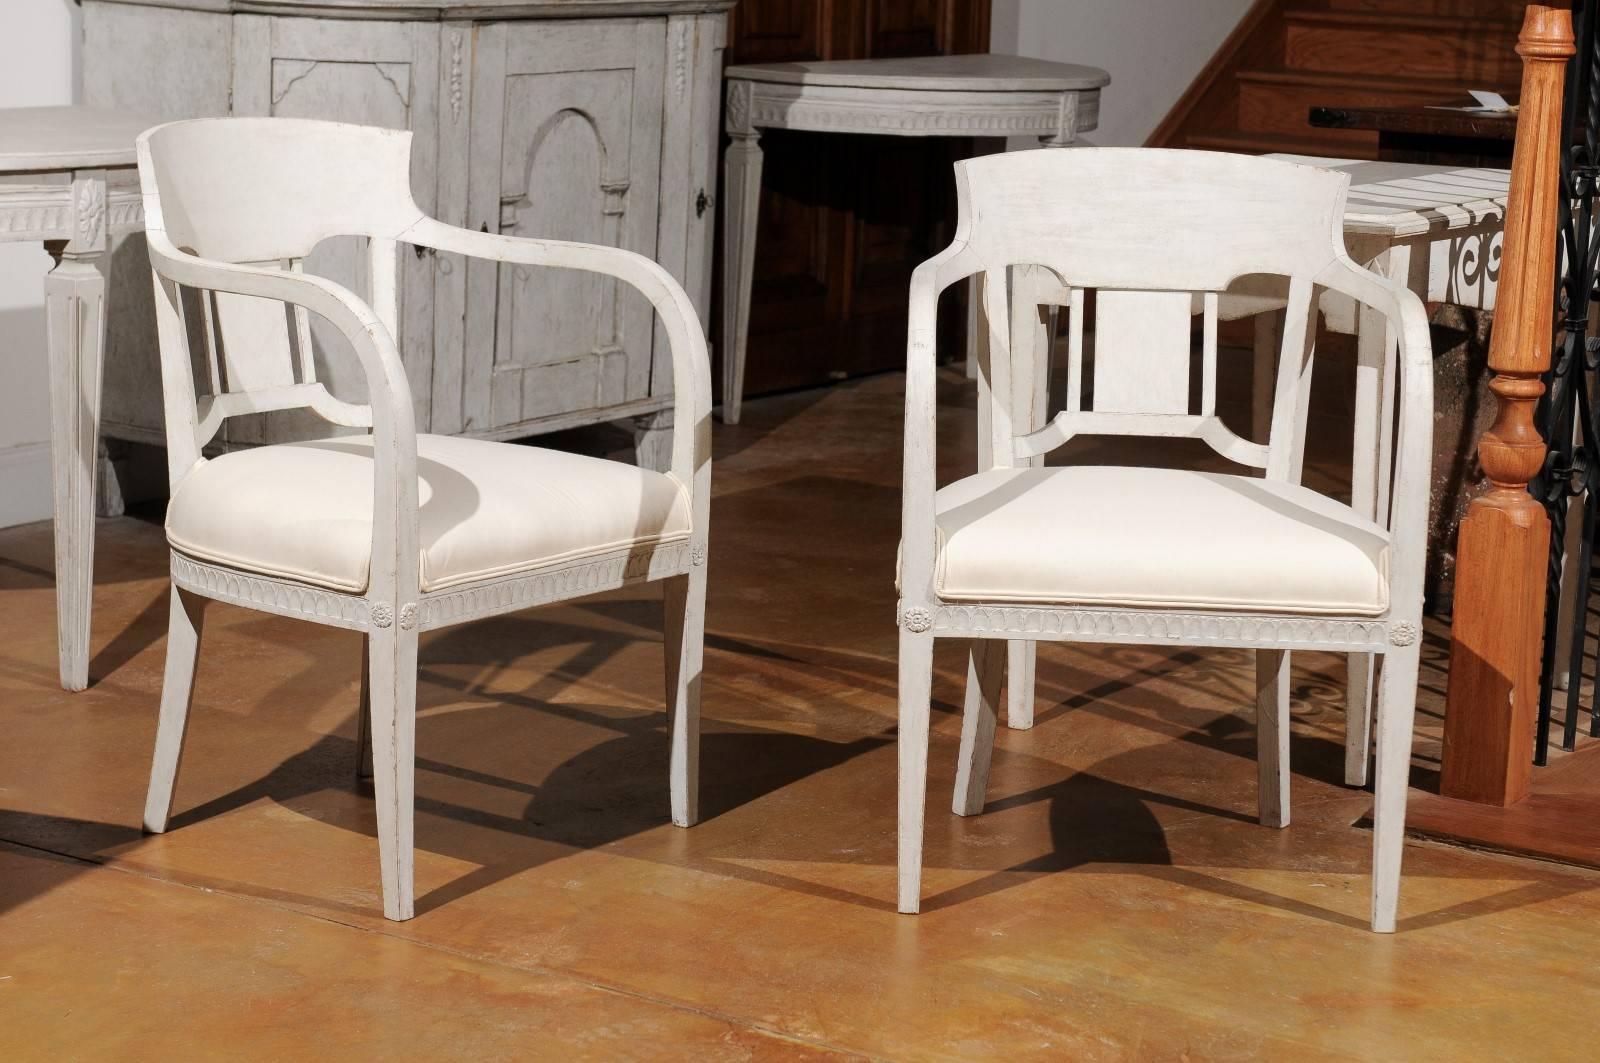 A pair of Swedish painted wood neoclassical style armchairs from the second half of the 19th century with tall open armrests, carved skirt and newly upholstered seat. Each of this pair of Swedish armchairs features a delicately curved back with